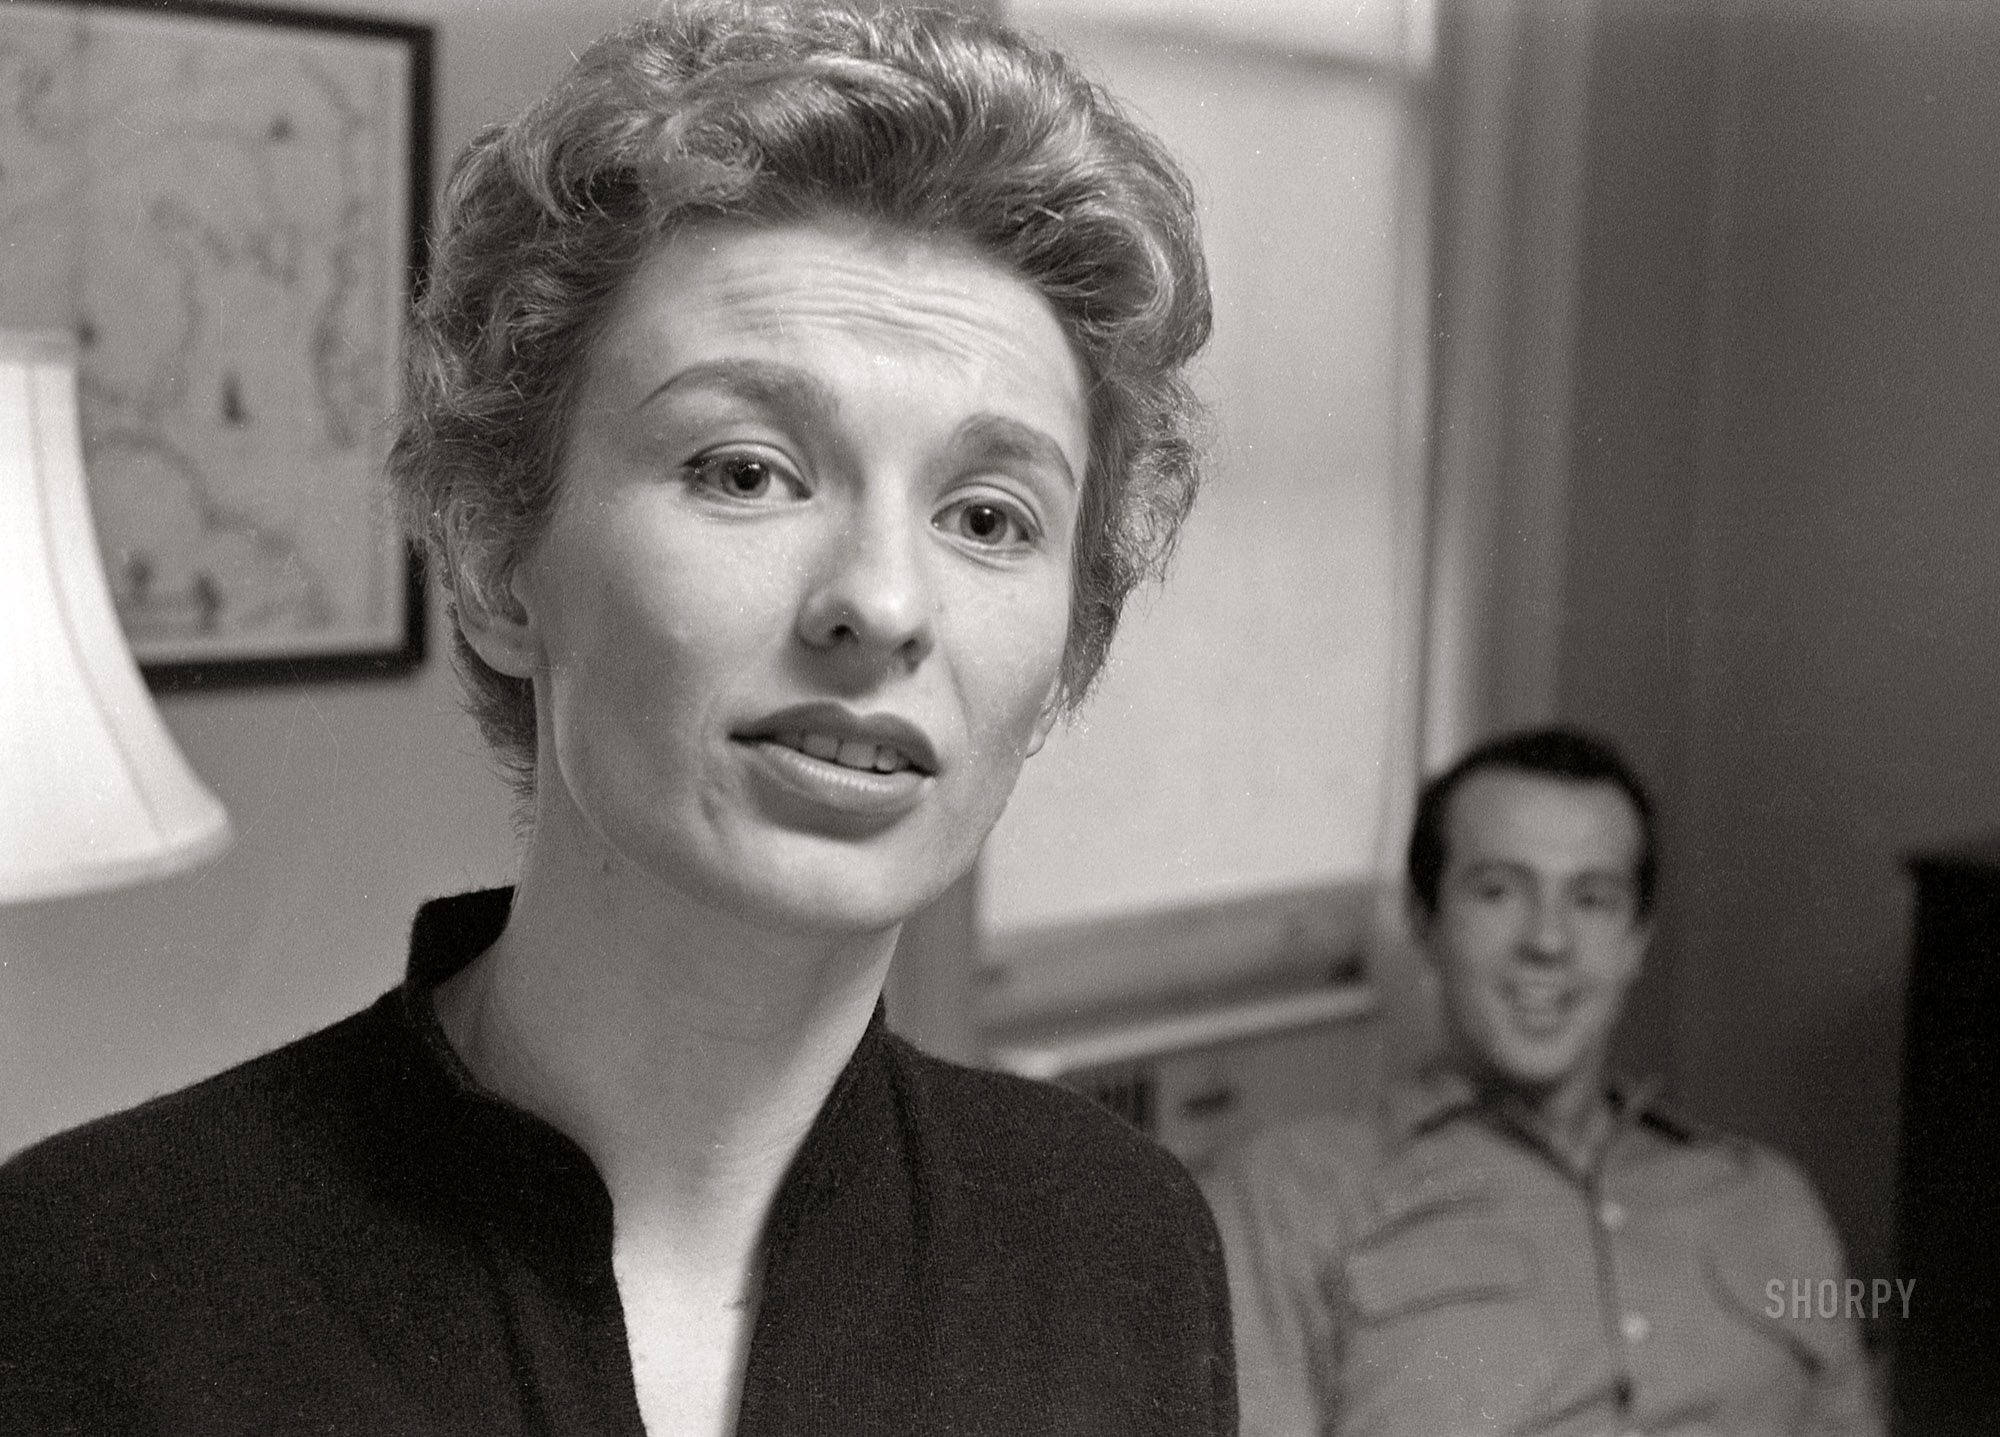 April 1954. New York. "Actress Cloris Leachman (seen earlier here, here and here) at home with husband George Englund." Photo by Phillip Harrington for Look magazine. View full size.
Cloris Leachman, Oscar Winner
And TV Comedy Star, Is Dead at 94
&nbsp; &nbsp; &nbsp; &nbsp; Cloris Leachman, who won an Academy Award for her portrayal of a neglected housewife in the stark drama “The Last Picture Show” but who was probably best known for getting laughs, notably in three Mel Brooks movies and on television comedies like “The Mary Tyler Moore Show” and “Malcolm in the Middle,” died on Wednesday at her home in Encinitas, Calif. She was 94. -- New York Times
